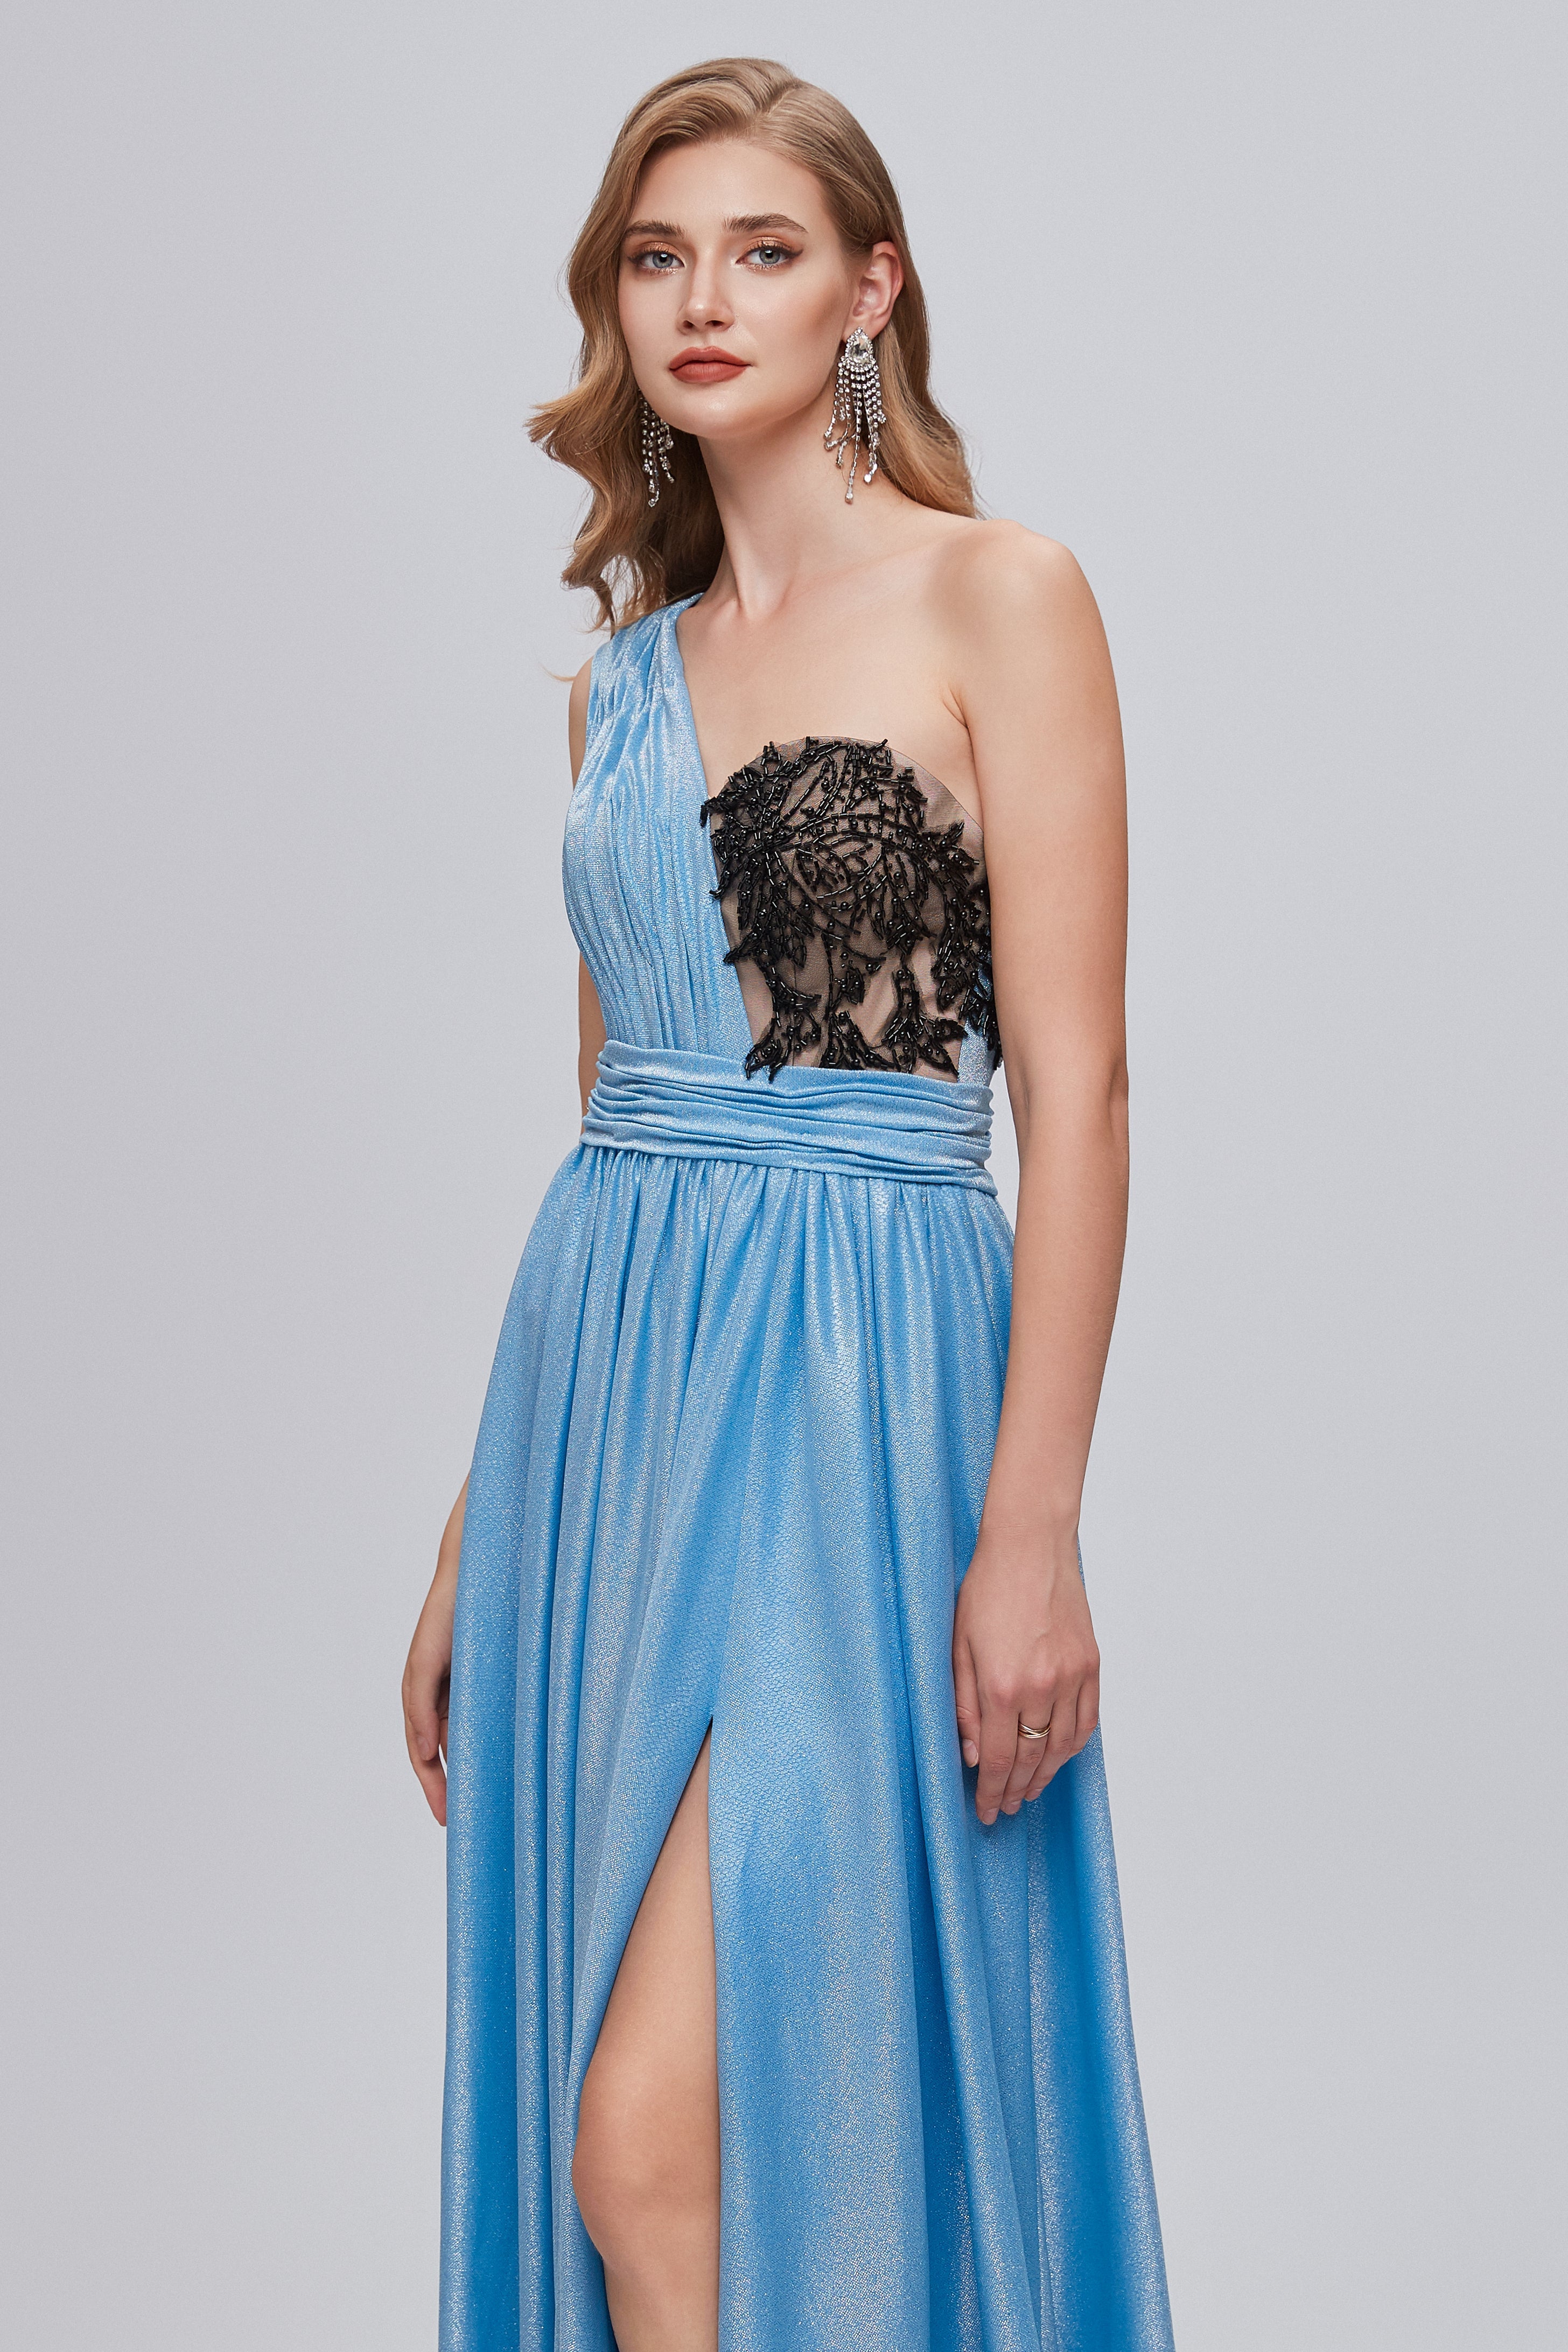 Formal Dresses For Ladies Over 76, Blue One Shoulder Ruched Long Prom Dresses with Applique